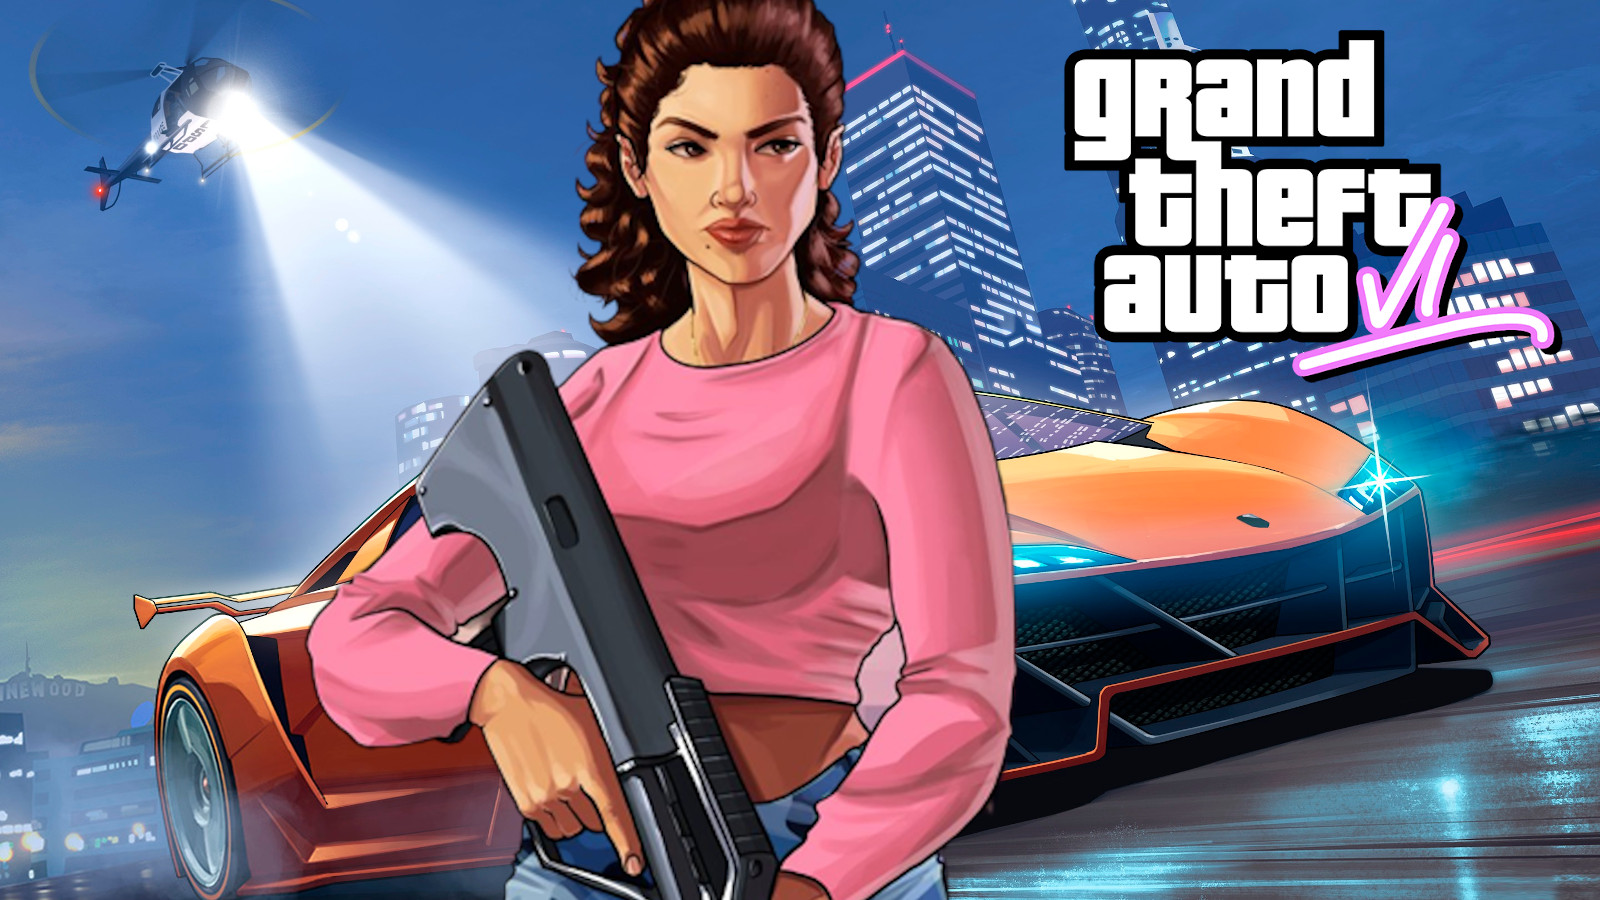 Leaker claims to reveal GTA 6 announcement trailer details - Dexerto